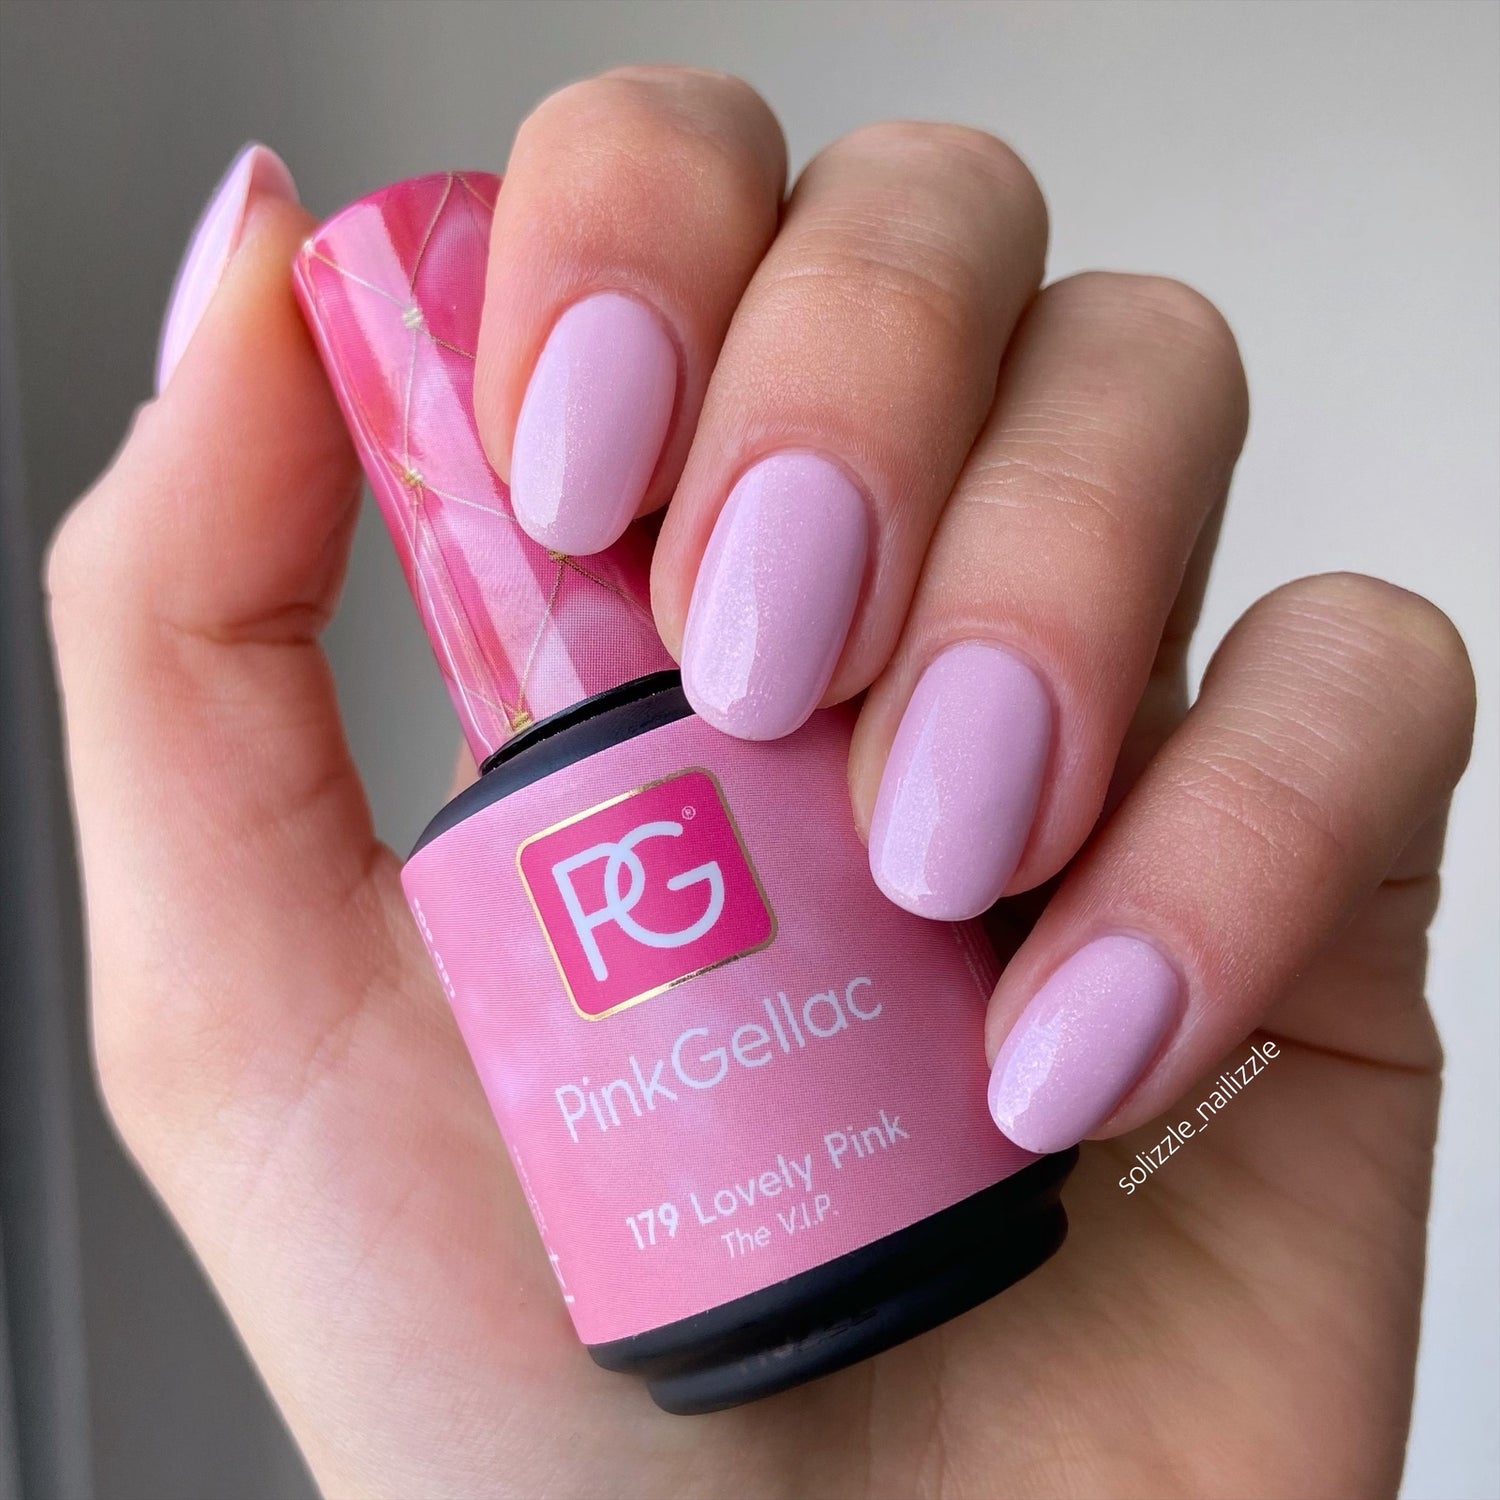 #179 Lovely pink